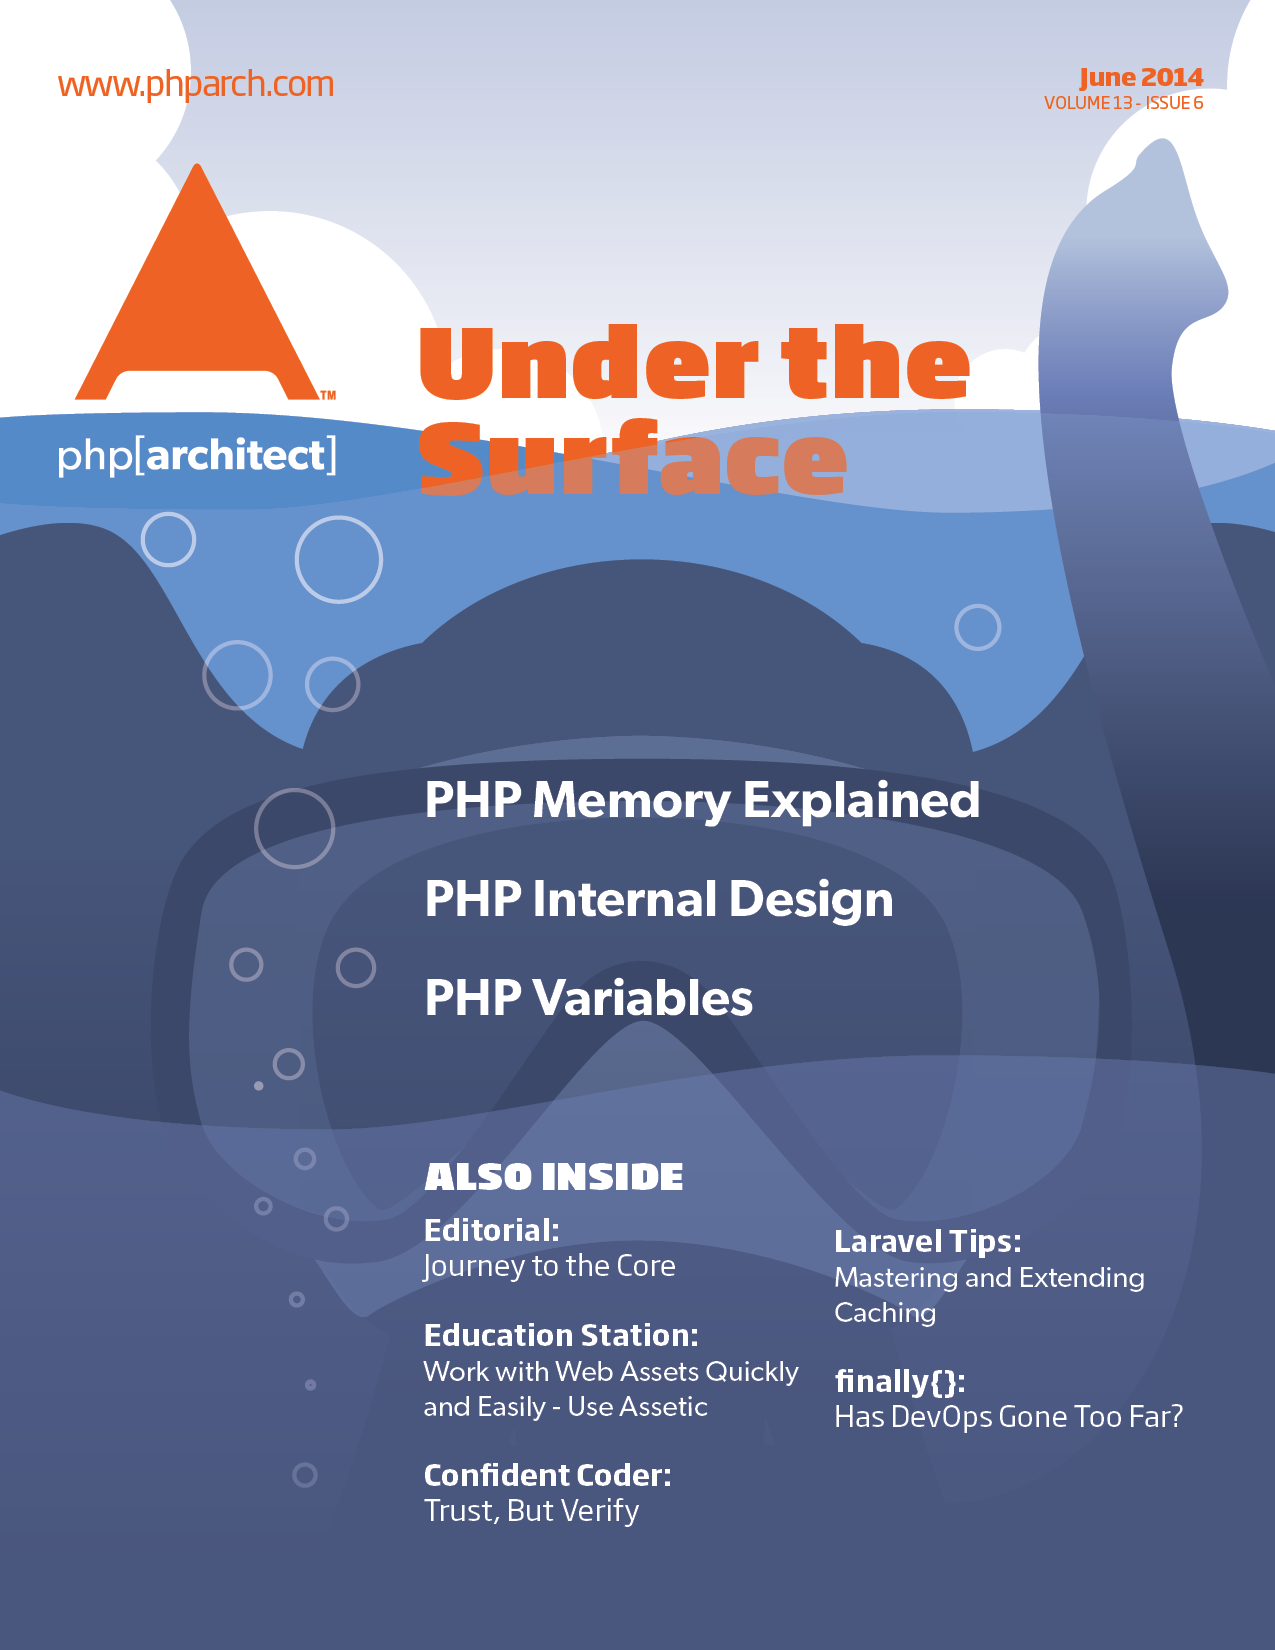 php[architect] June 2014 - Under the Surface